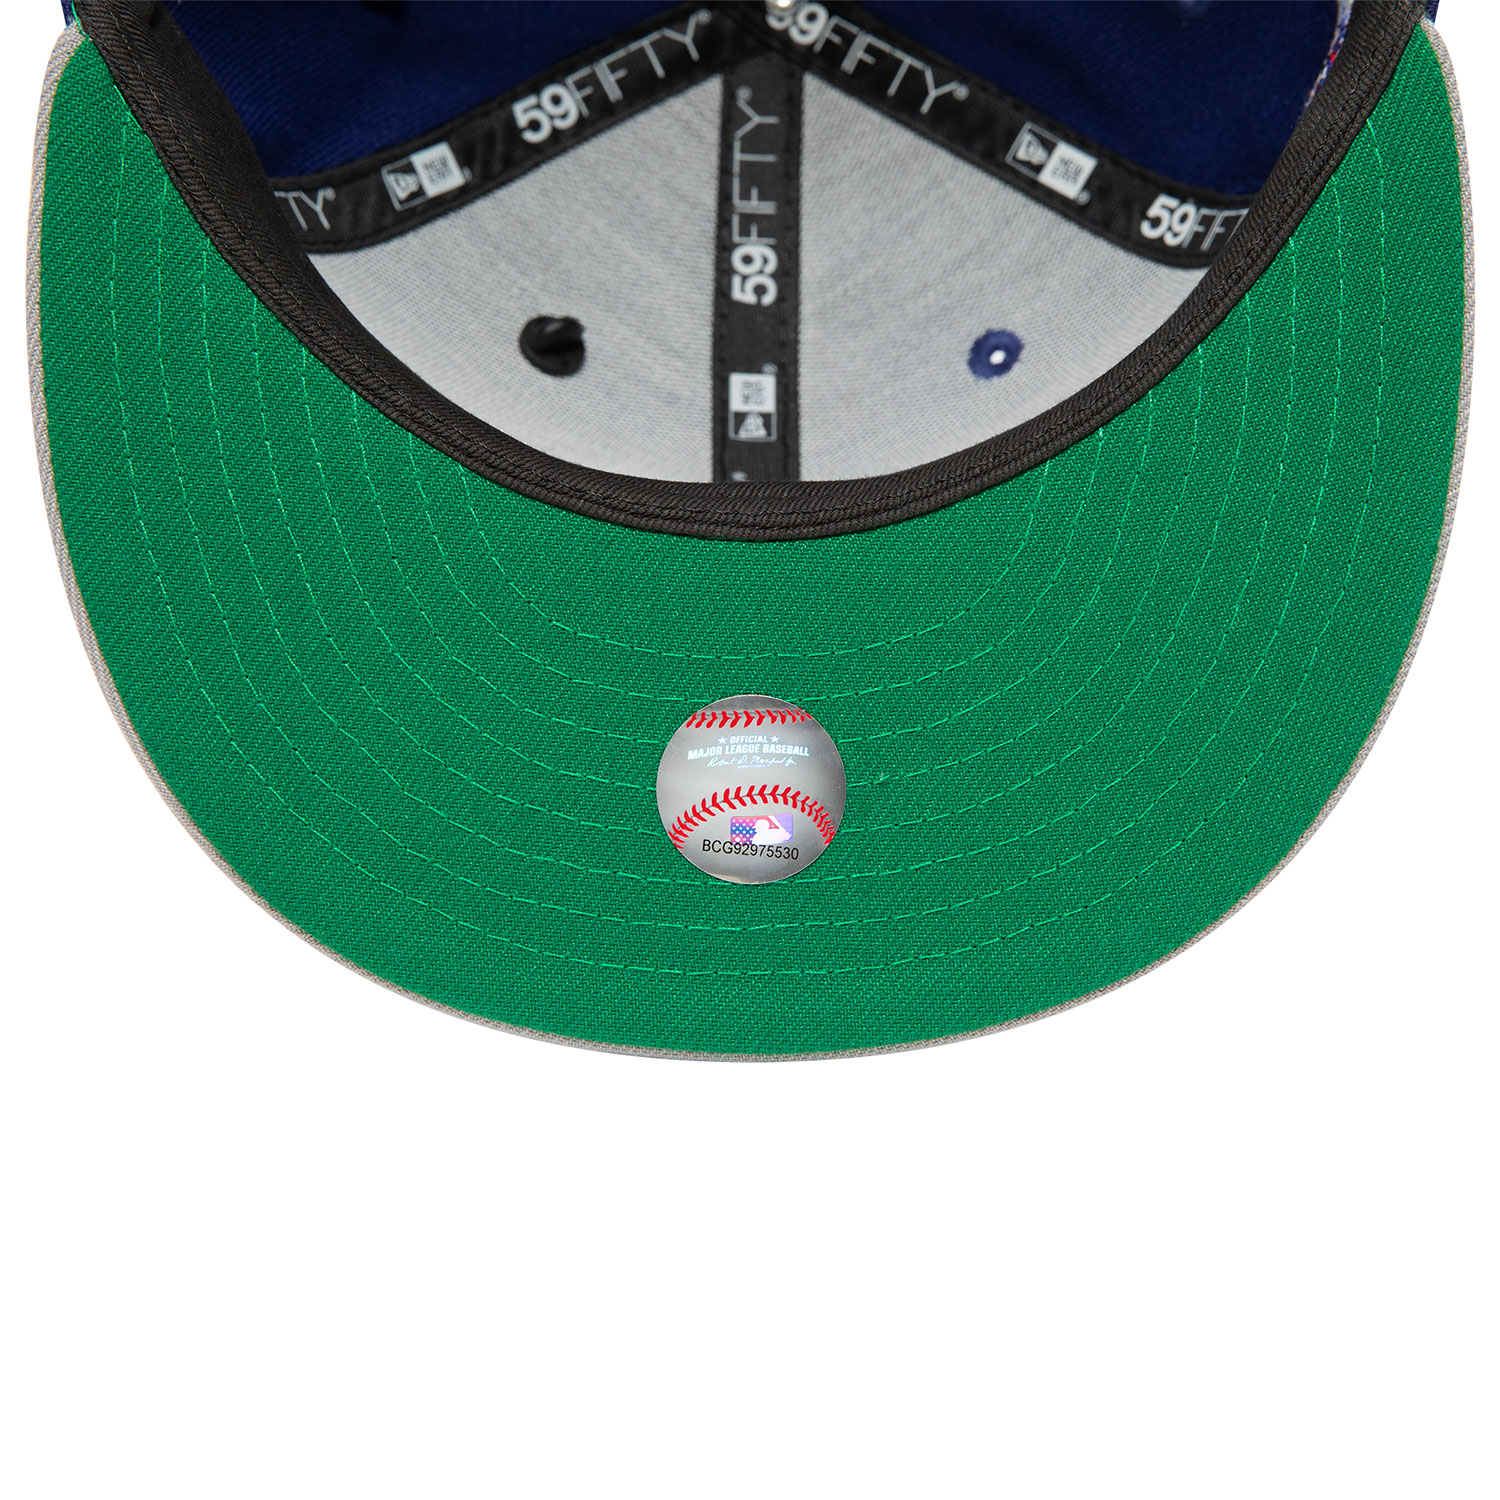 LA Dodgers MLB Pin Badge Blue 59FIFTY Fitted Cap